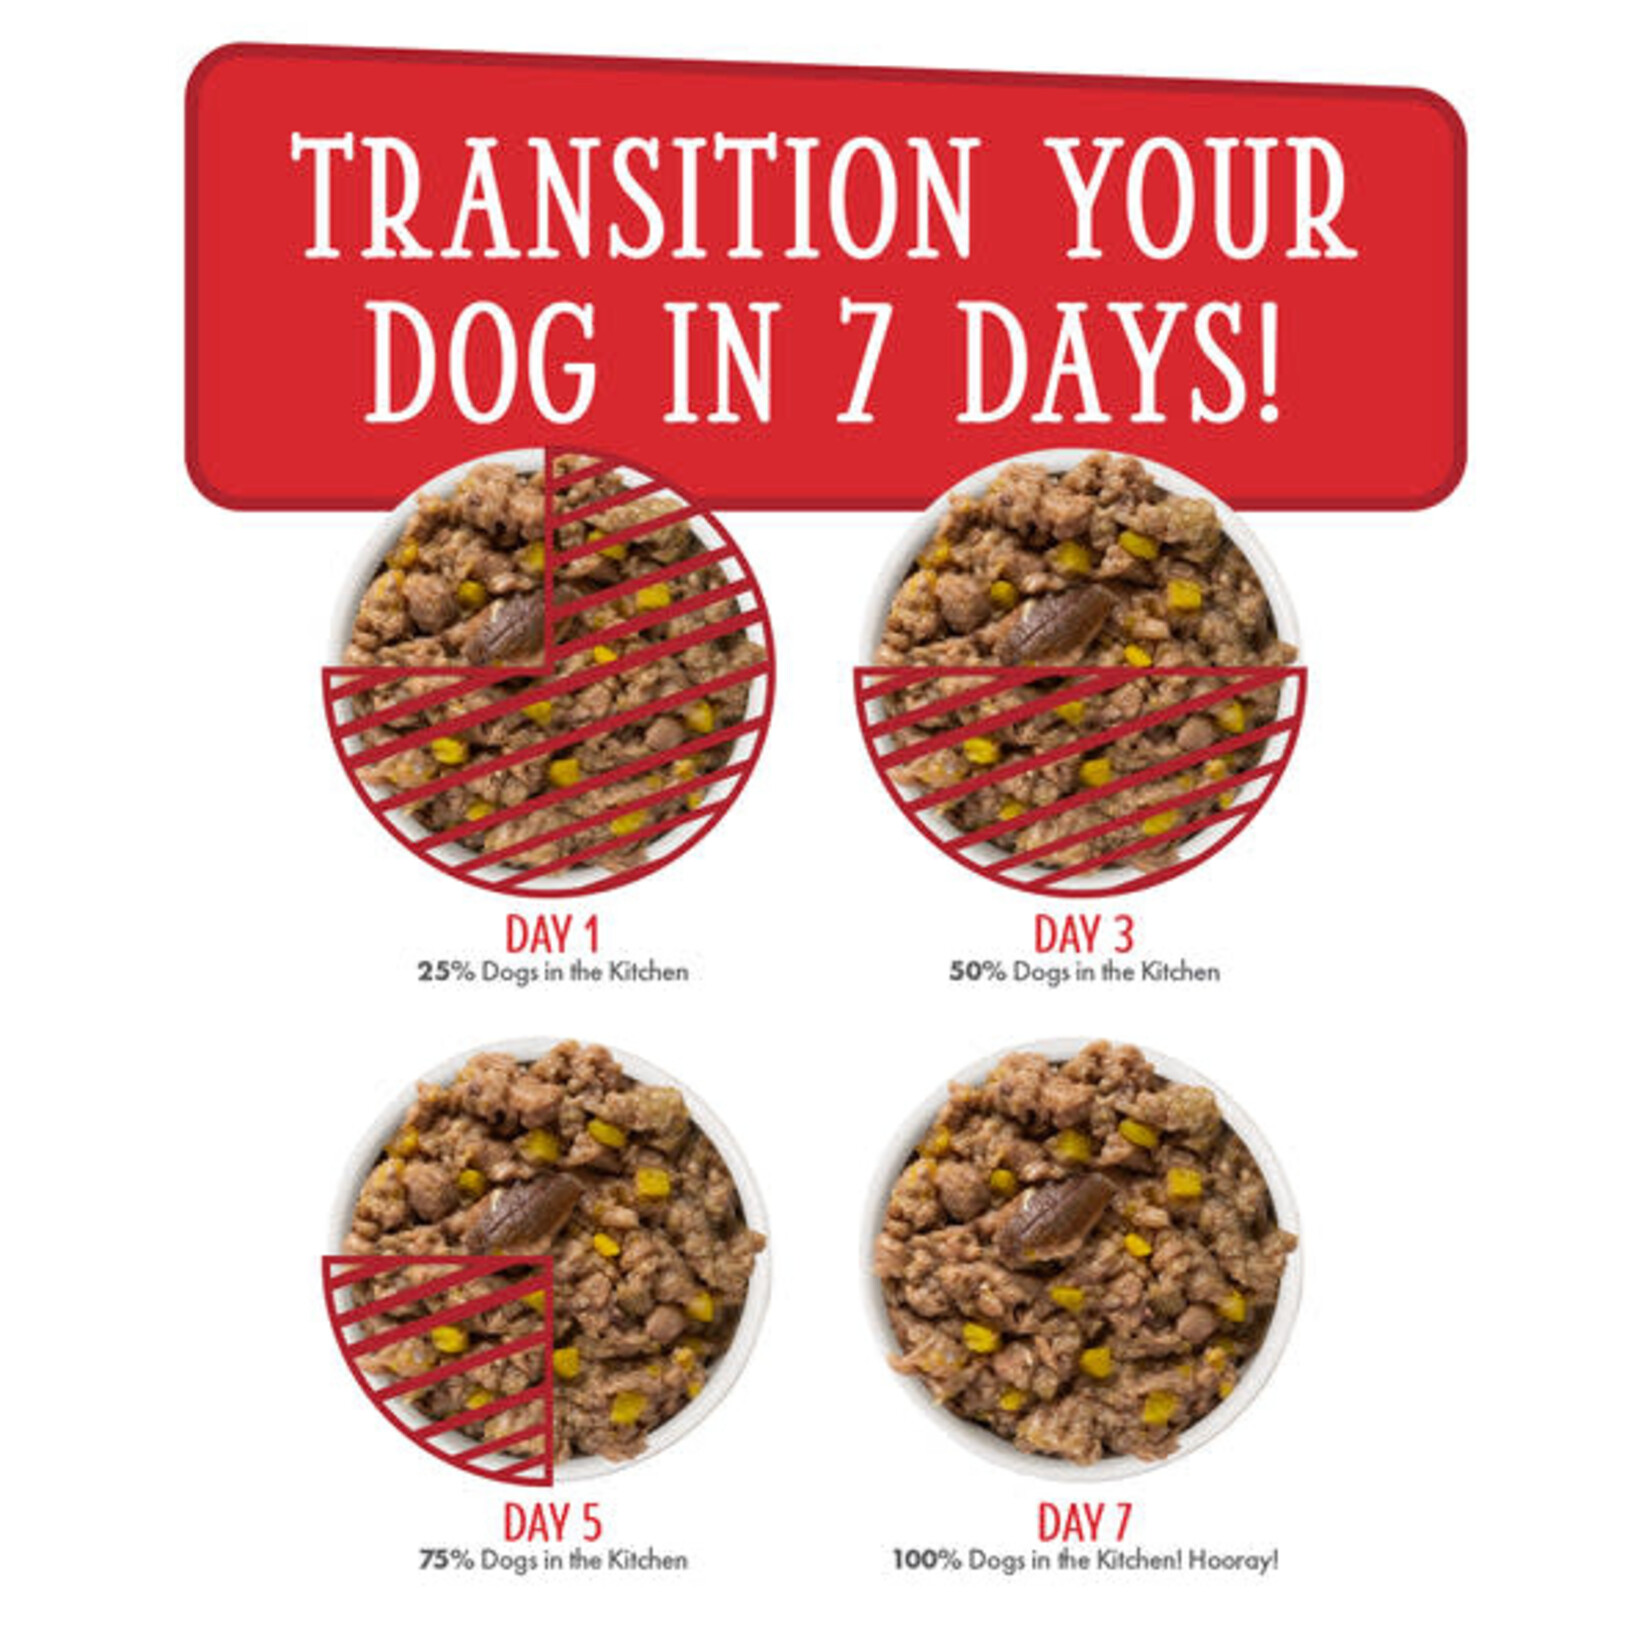 Weruva Dogs in the Kitchen - The Double Dip Wet Dog Food Pouches